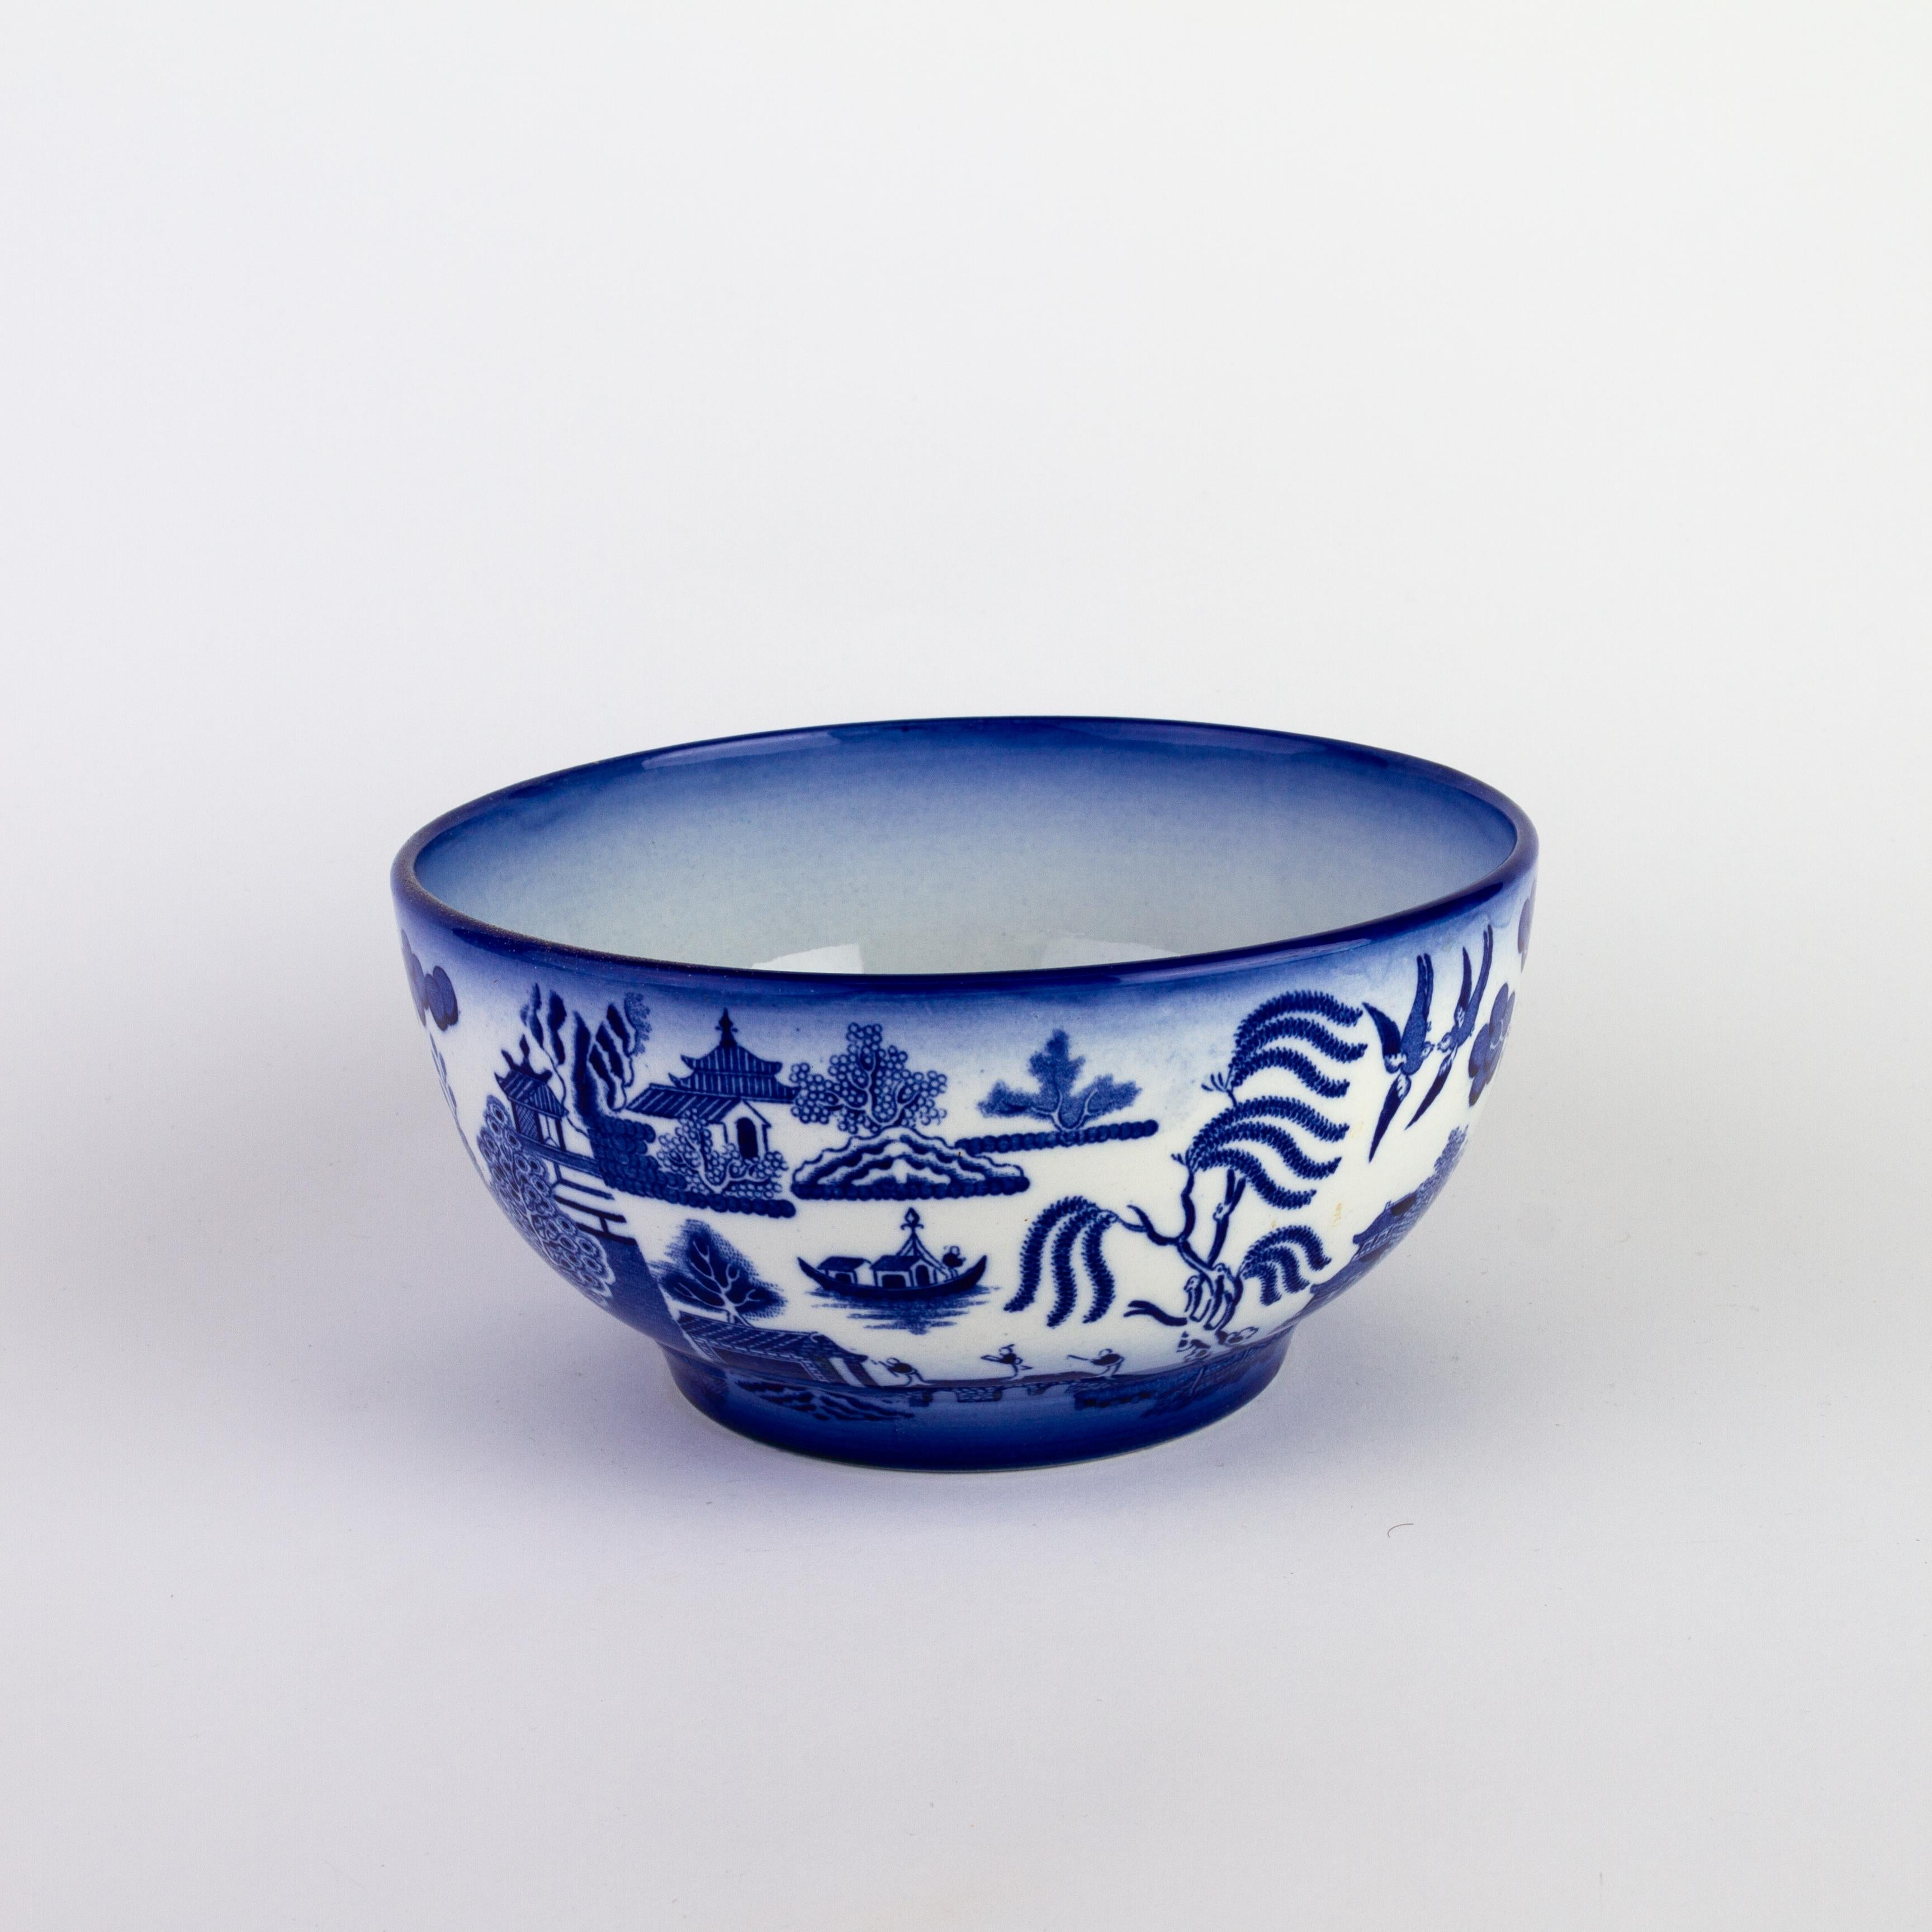 Chinese Pattern Blue & White Porcelain Bowl
Good condition overall, as seen.

Free international shipping.